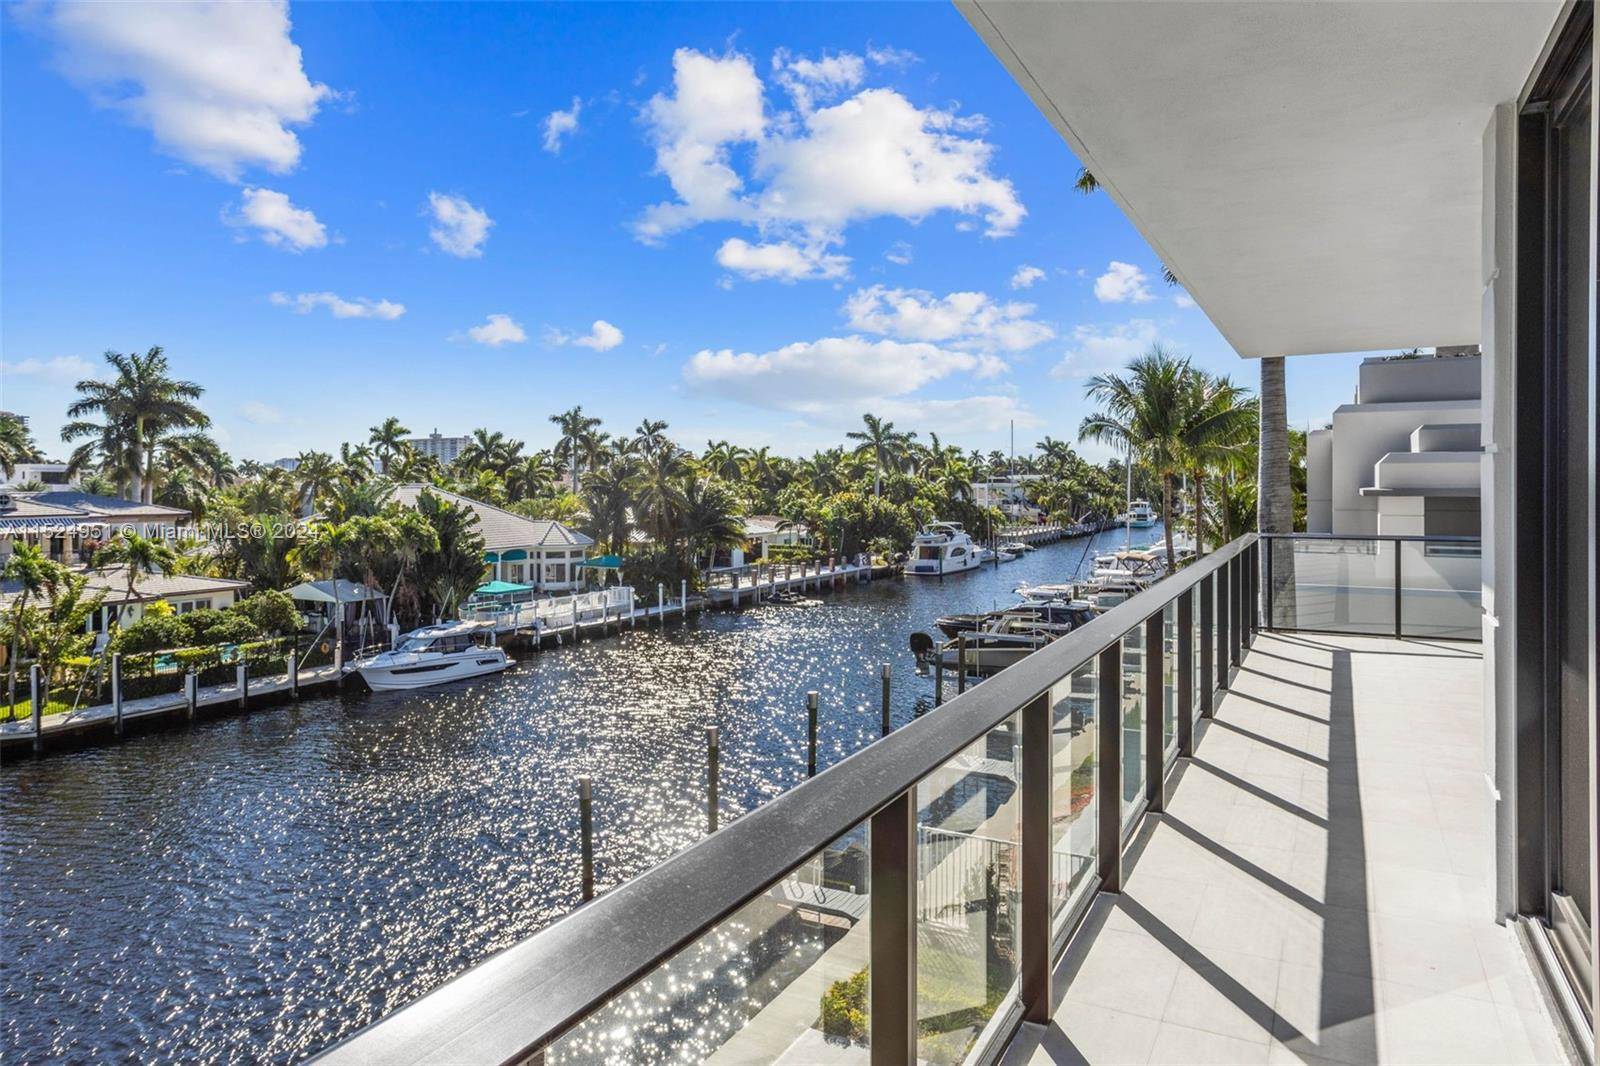 Move In Ready New Construction Ultra Luxurious Waterfront Condo off Las Olas Blvd on Isle of Venice.